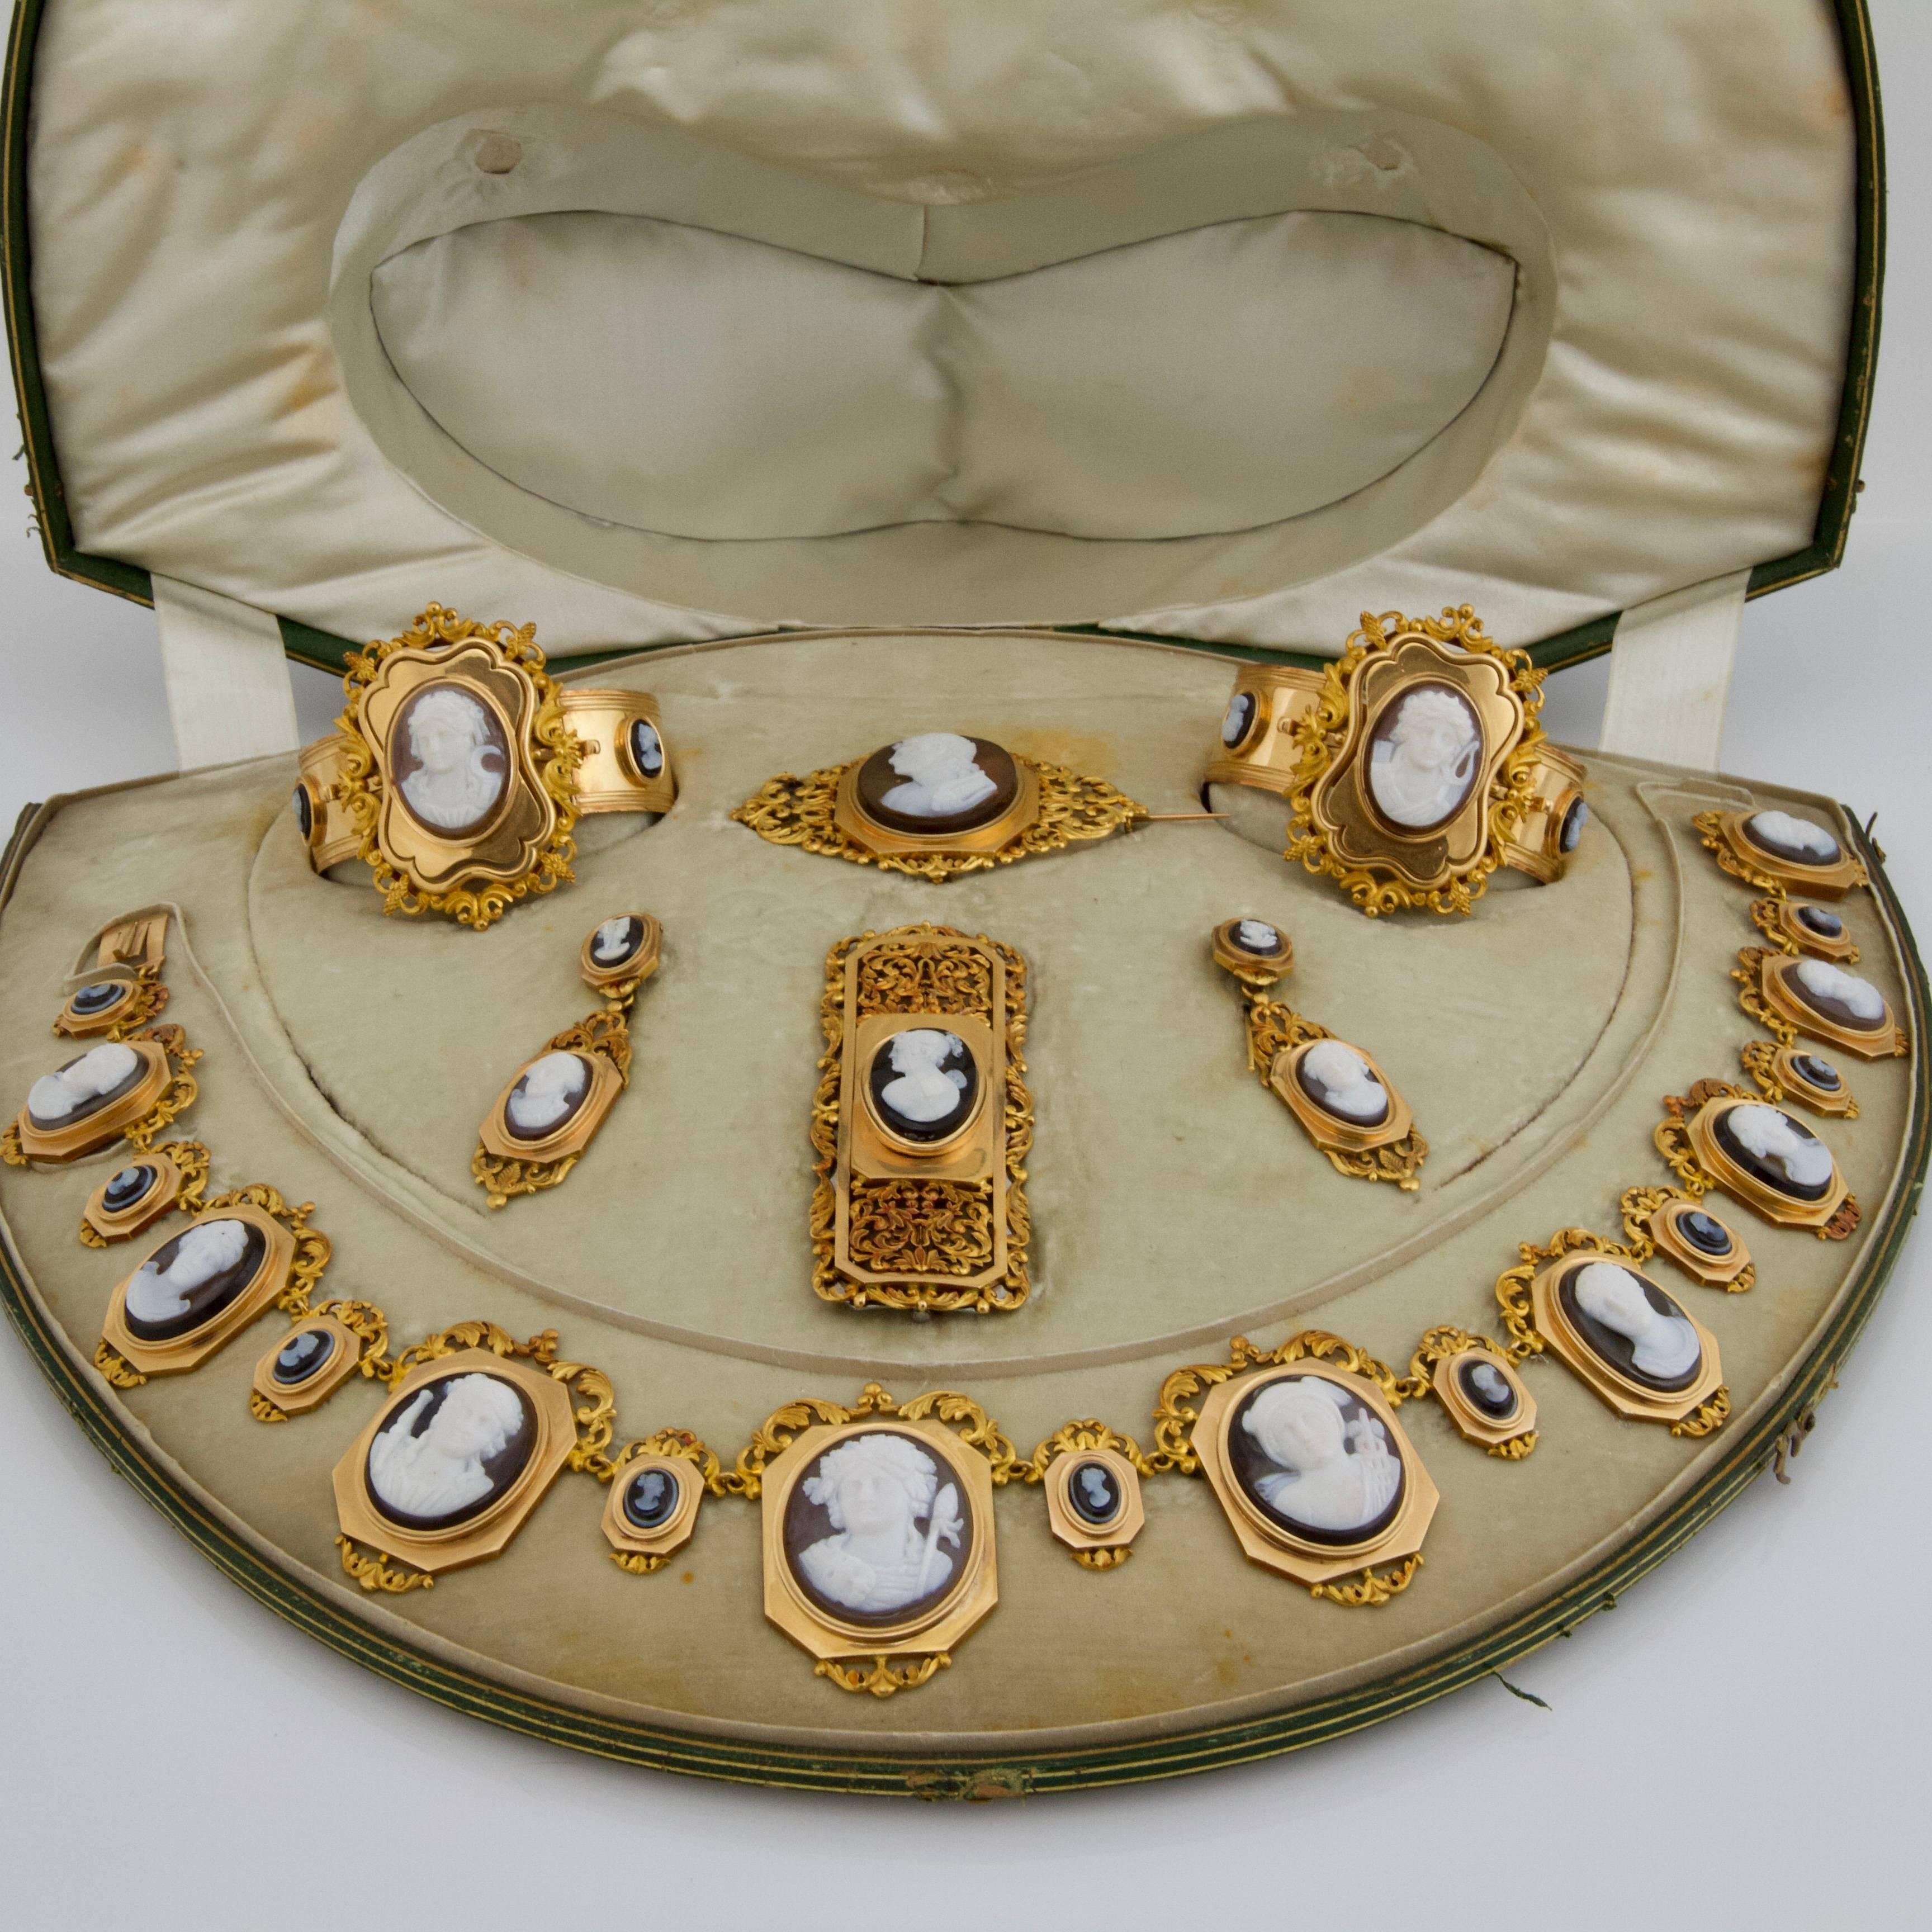 Comprising seven pieces, two bangles, a necklace, a buckle, a brooch and earrings pendants. Set with 30 agate-nicolo cameo on yellow gold.
Cameo representing a large range of mythological divinities, on the brooch Terpsichore, on the bangles Artemis